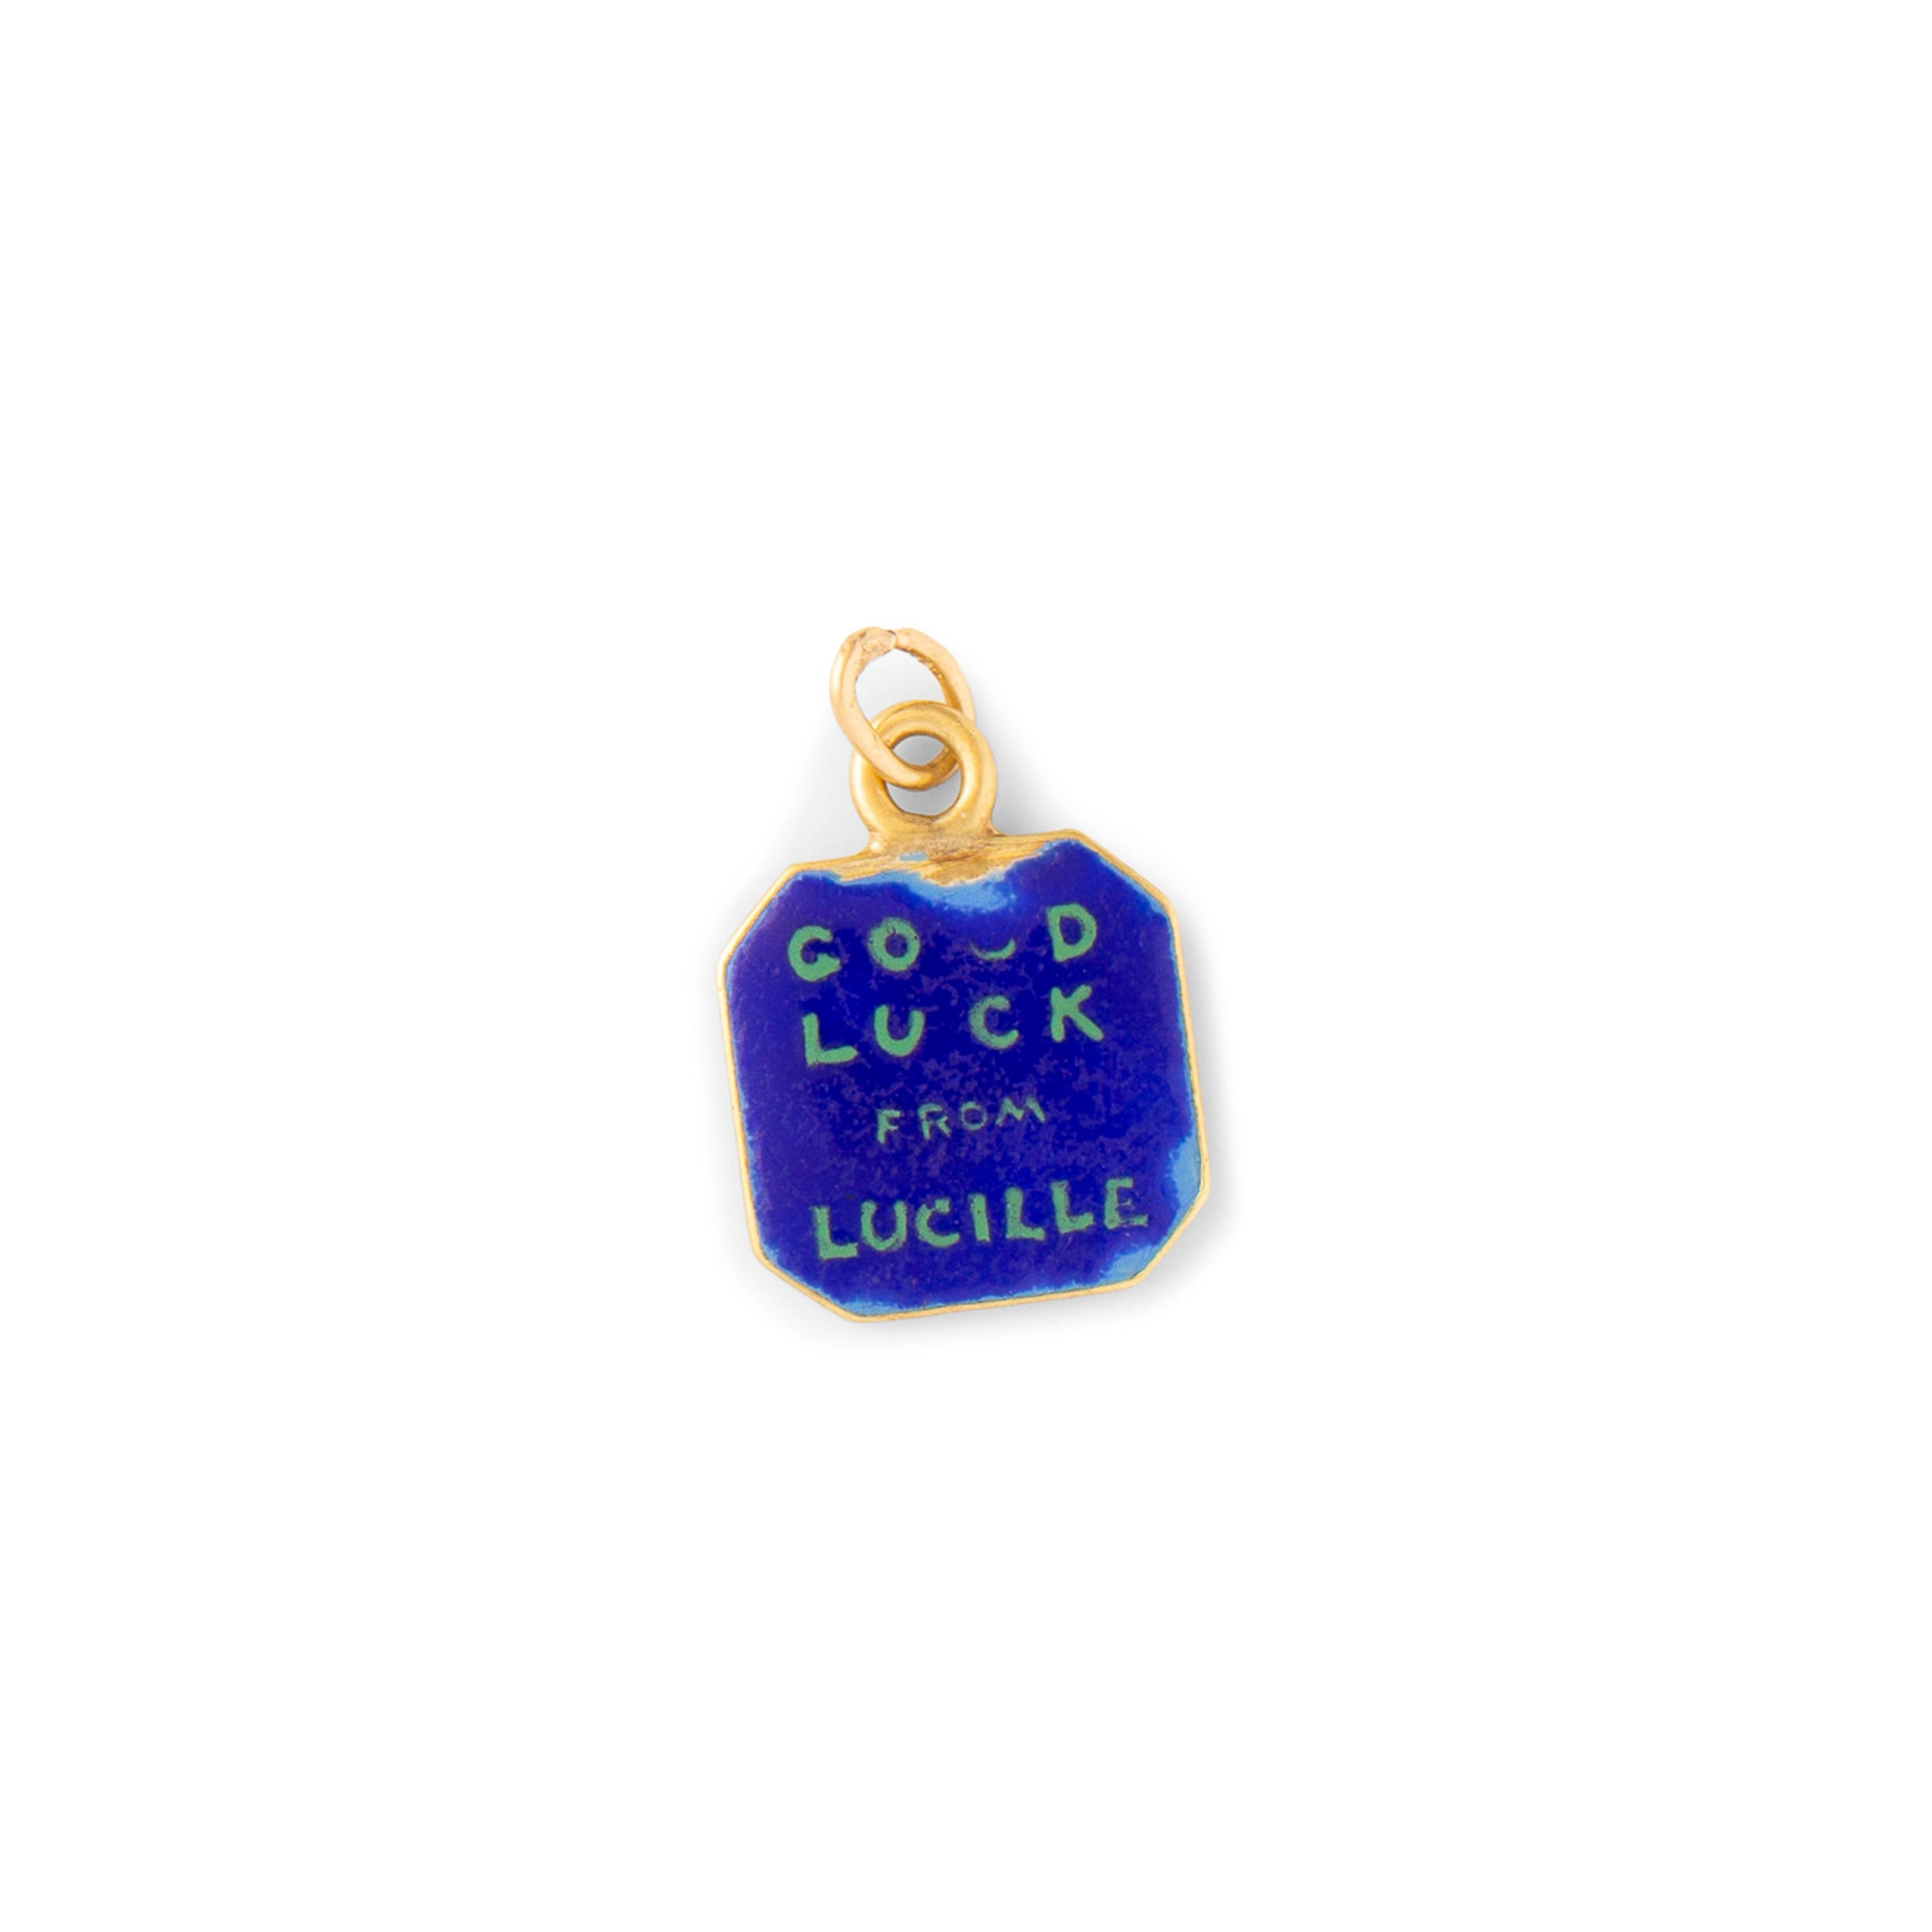 1930s "Good Luck" Enamel and 14K Gold Charm